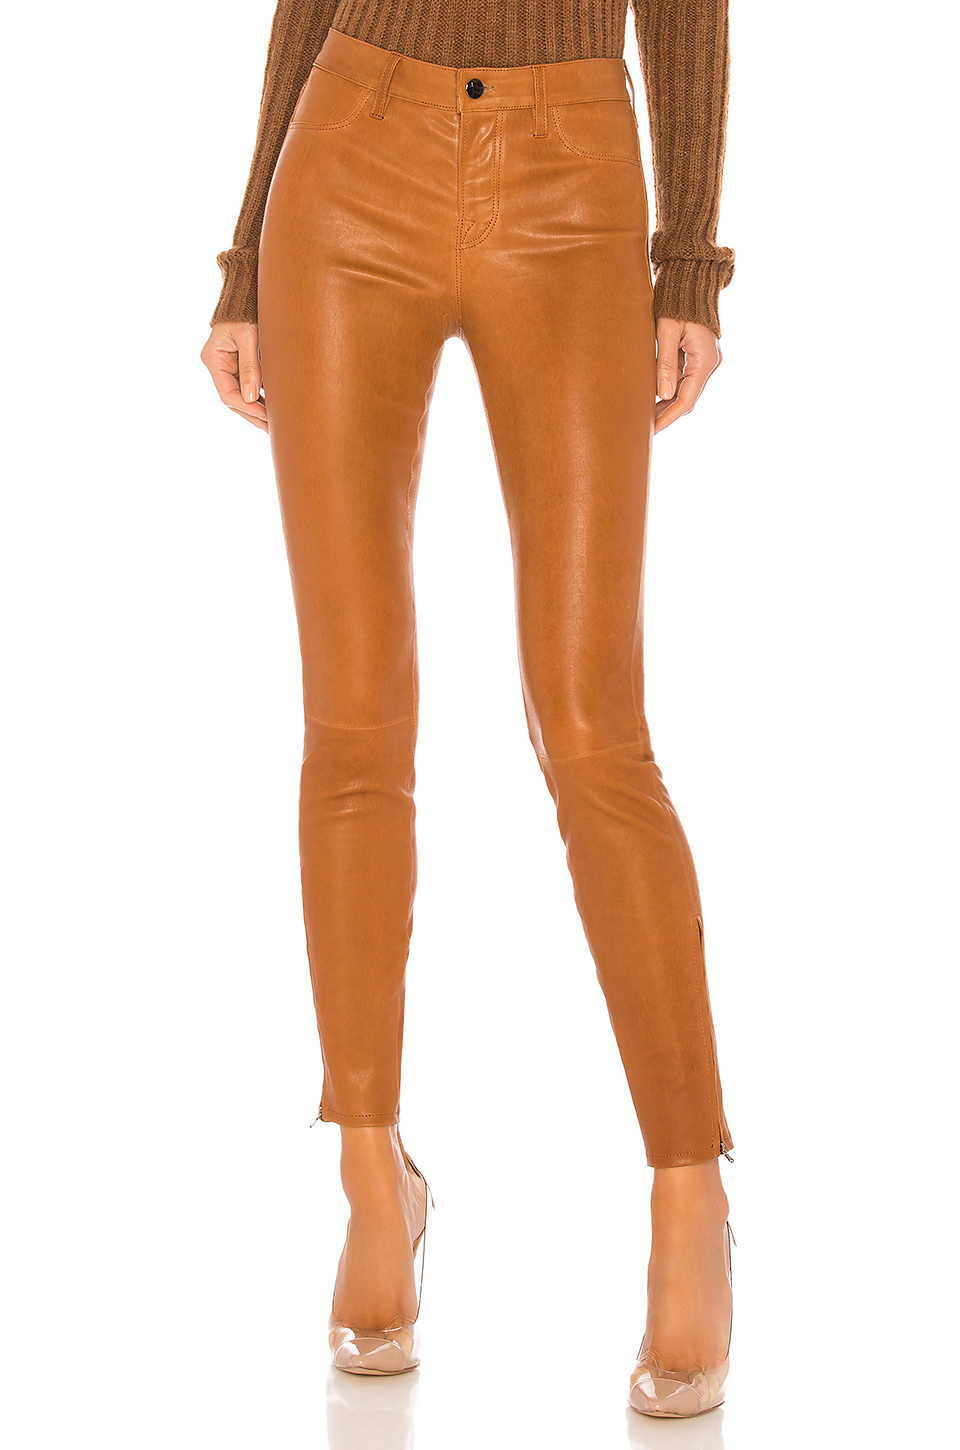 light brown leather pants